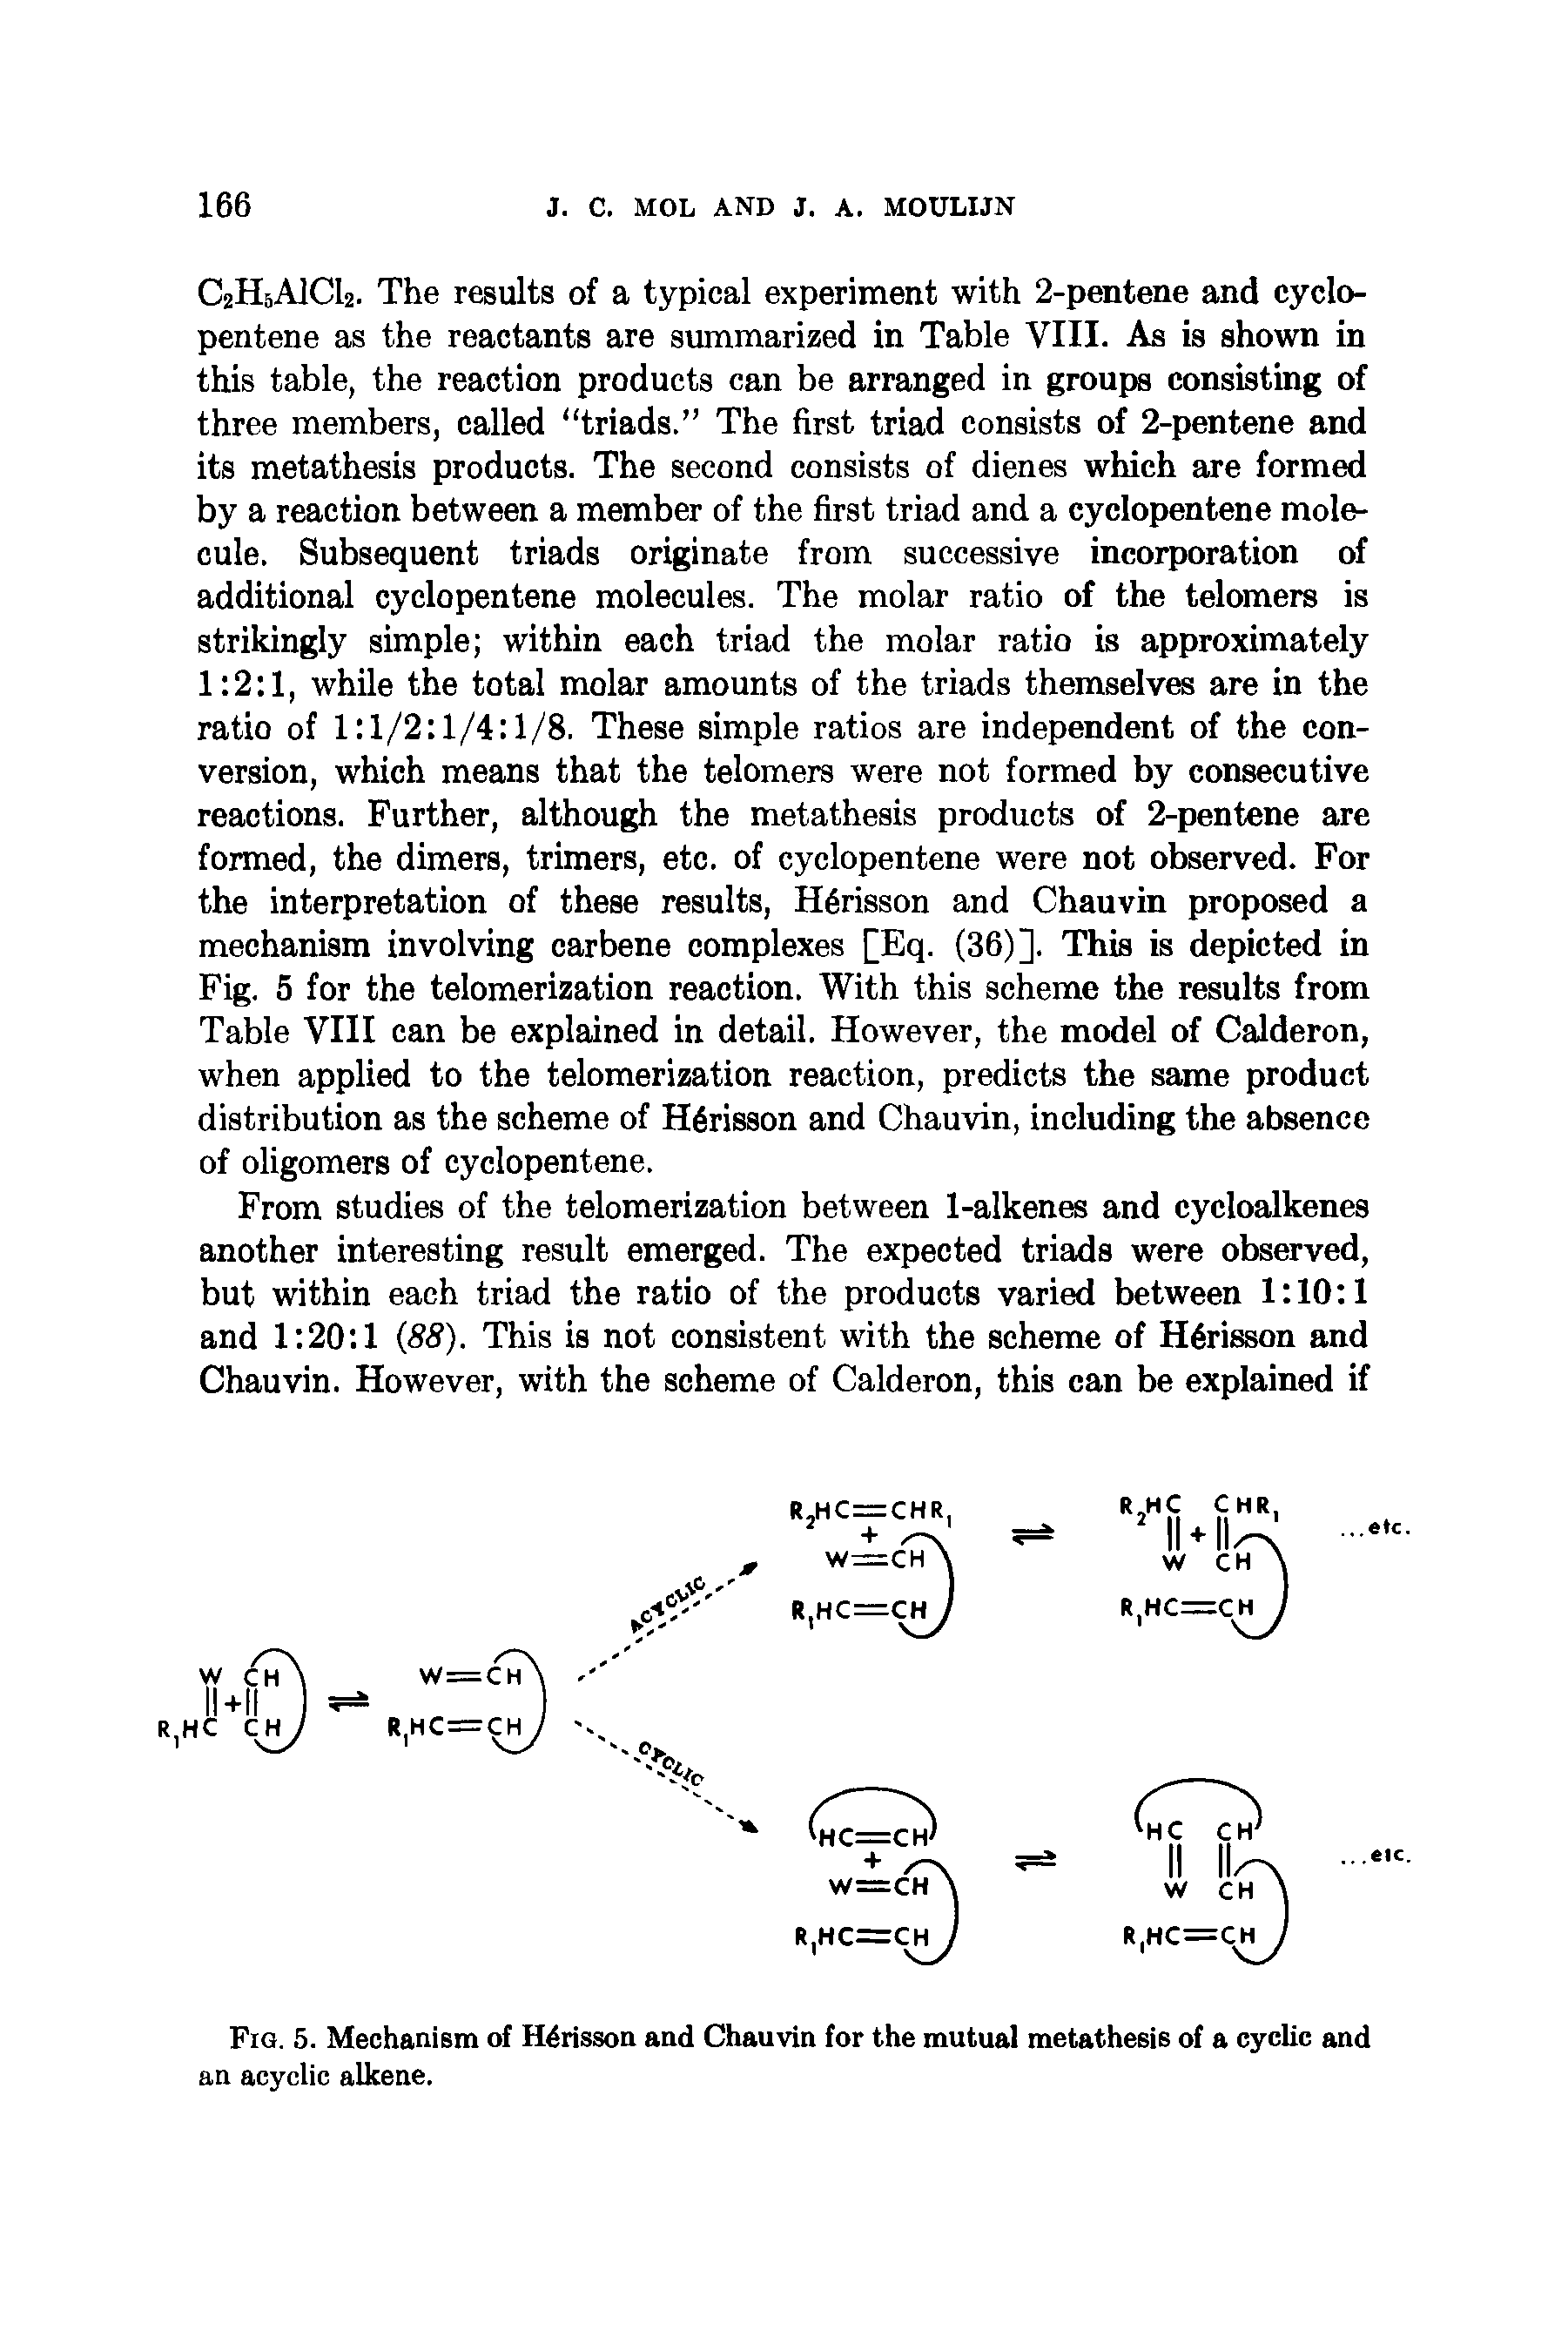 Fig. 5. Mechanism of H risson and Chauvin for the mutual metathesis of a cyclic and an acyclic alkene.